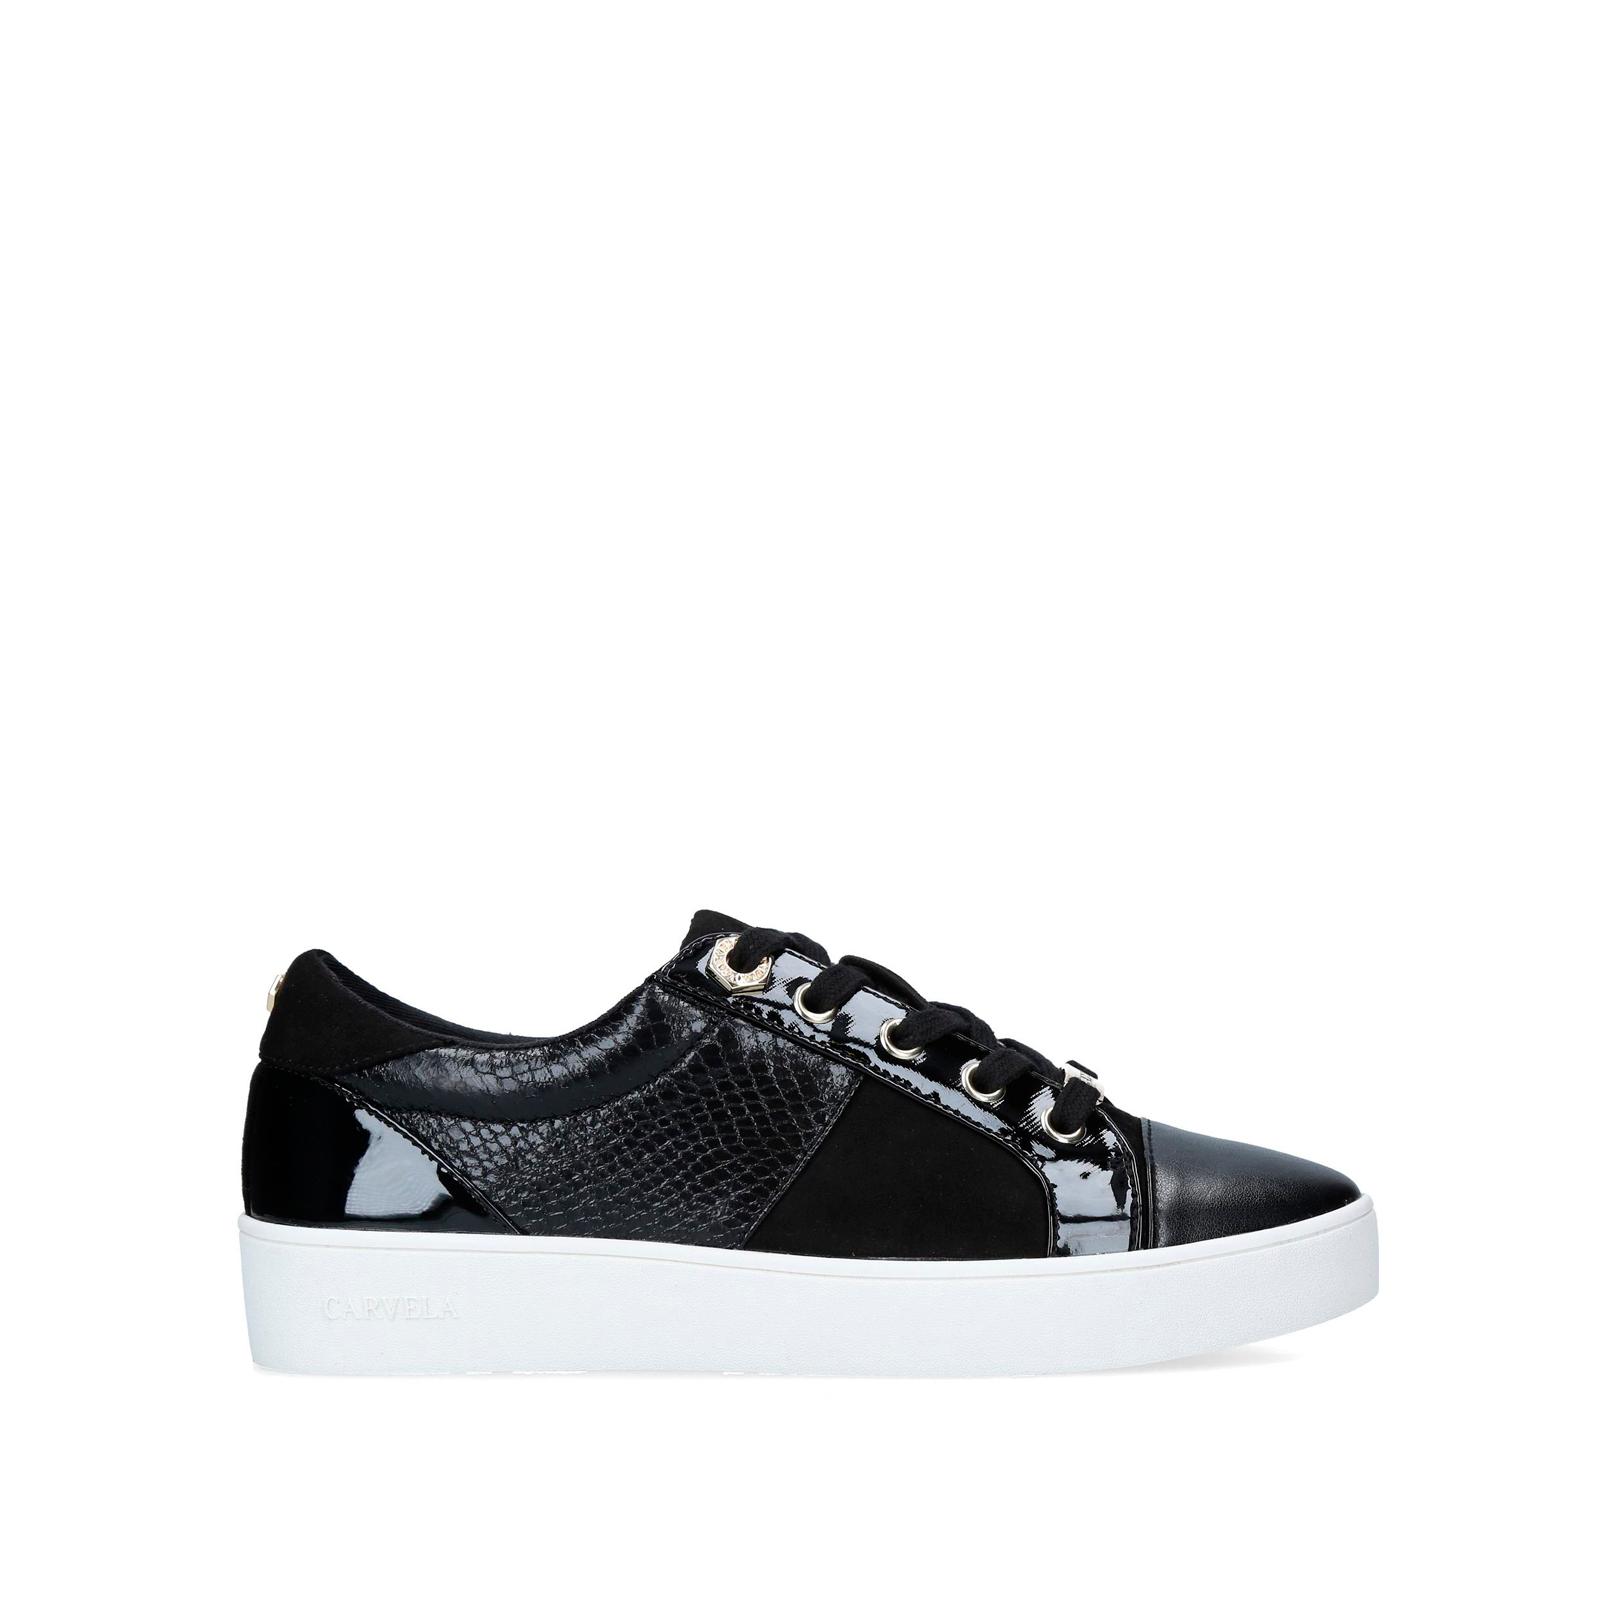 JAGGER Black Lace Up Sneakers by CARVELA